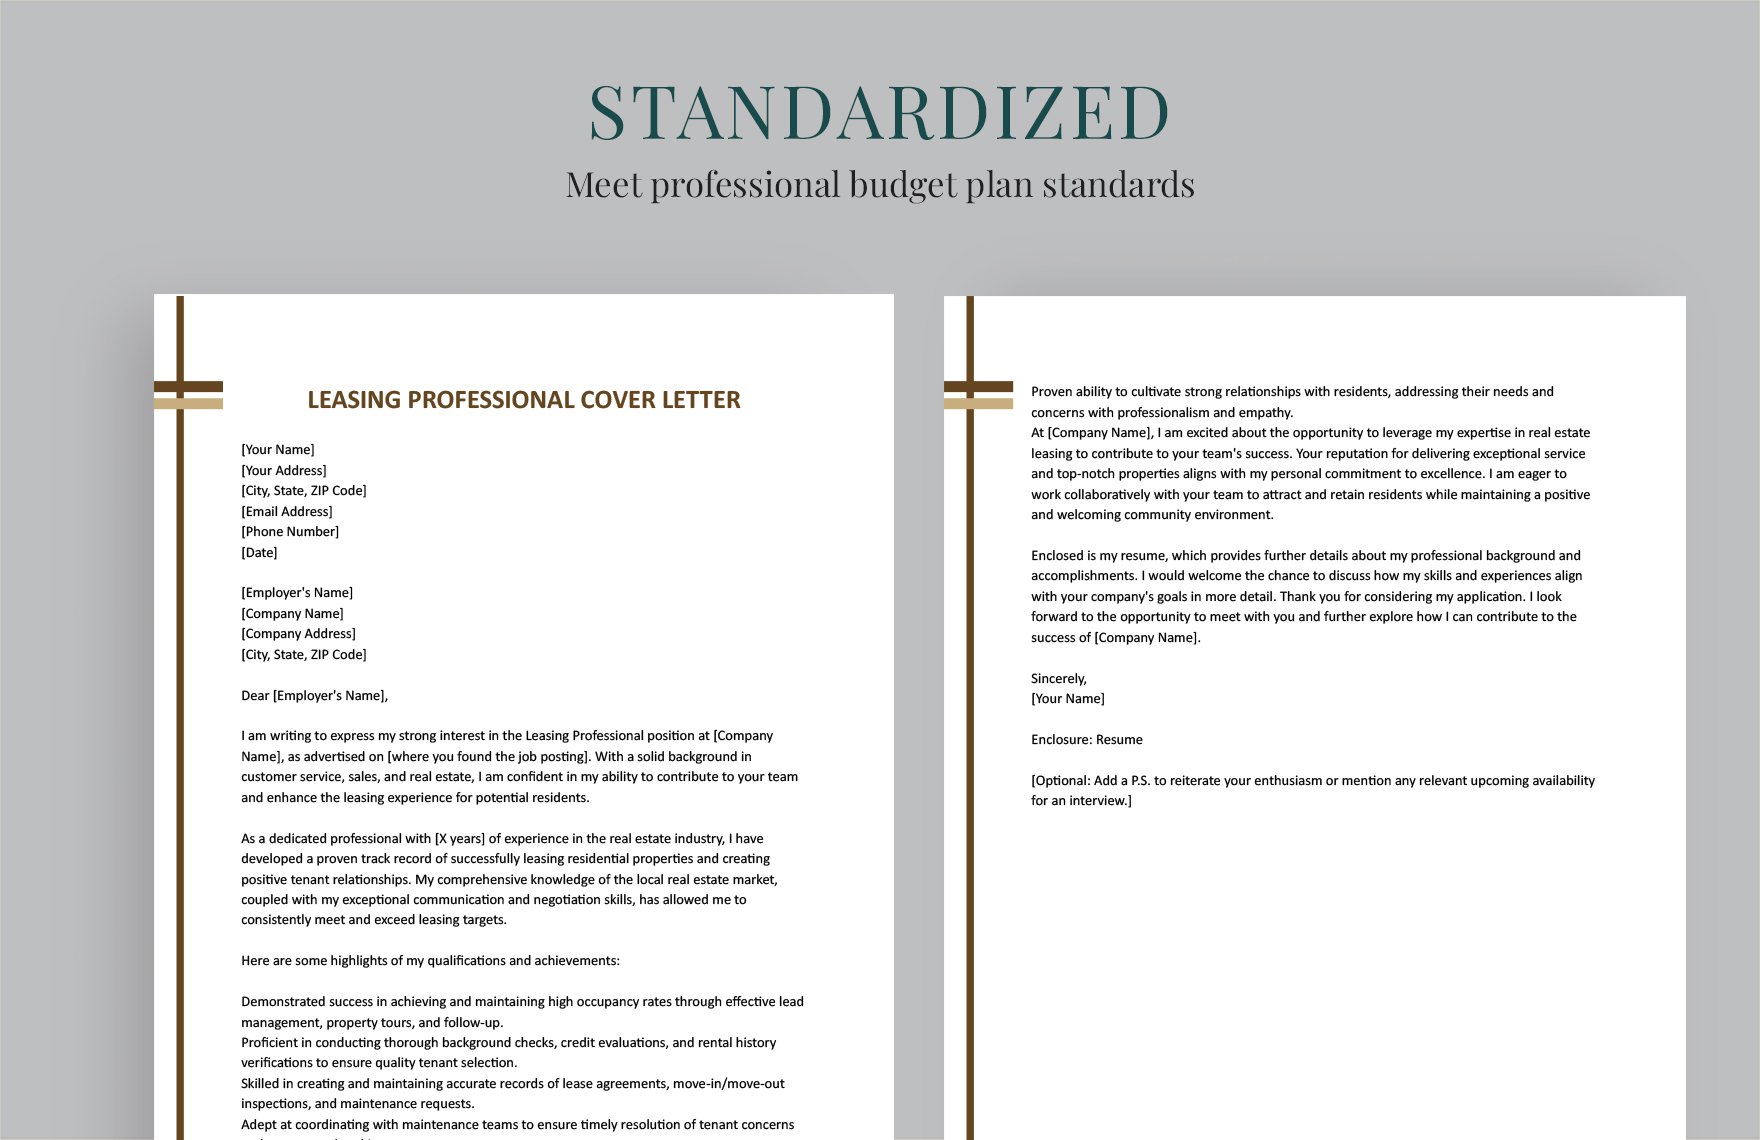 Leasing Professional Cover Letter